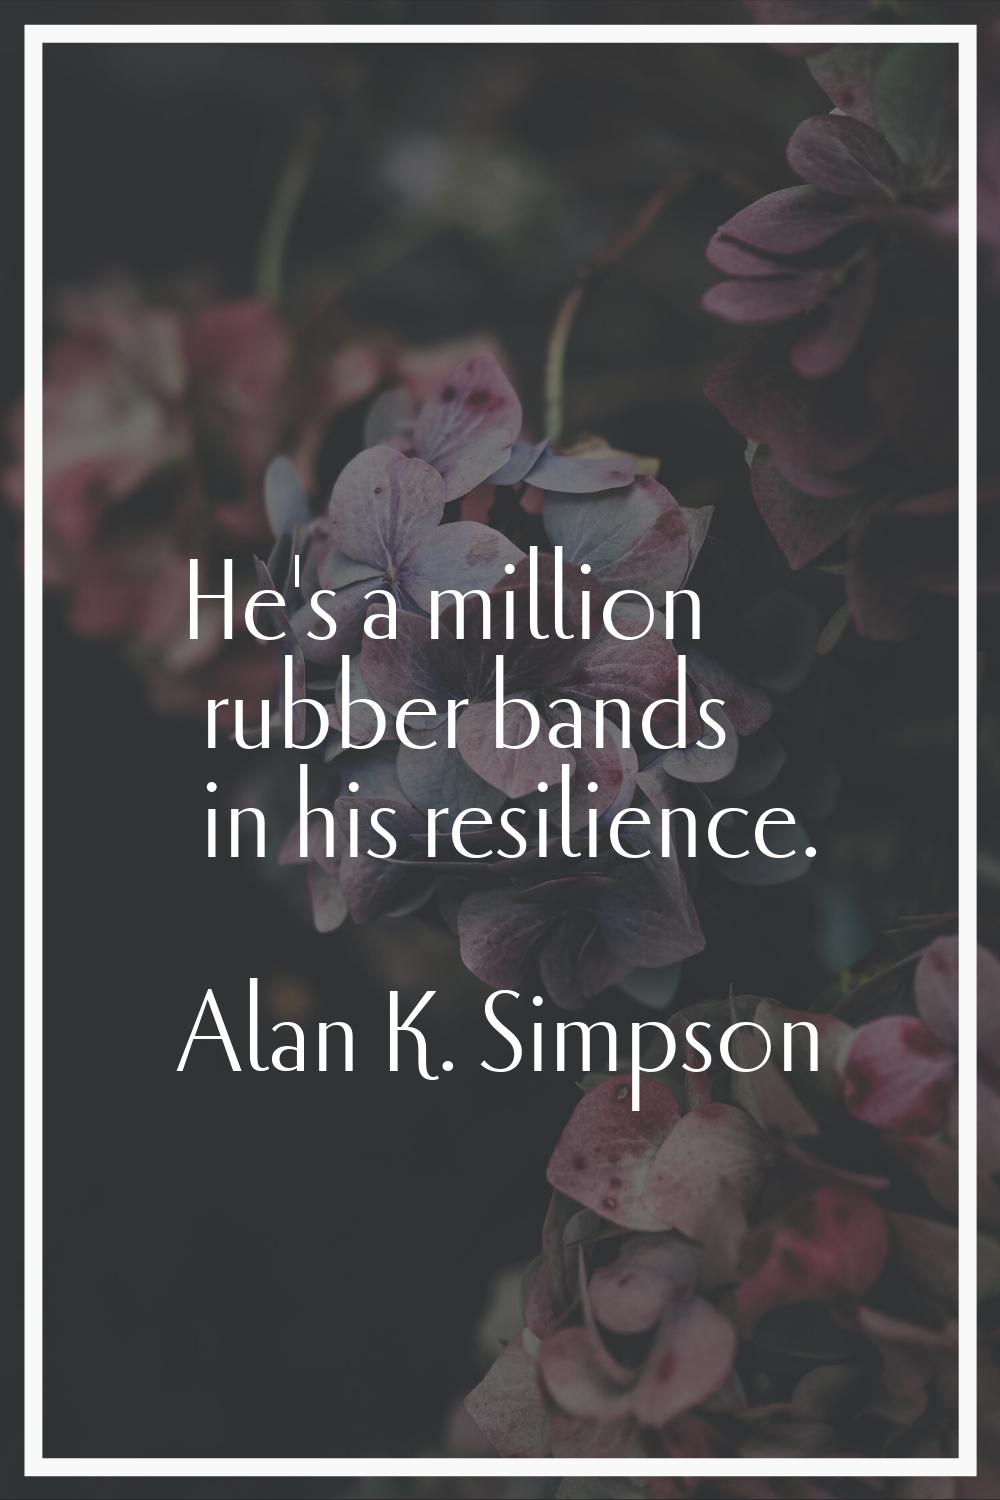 He's a million rubber bands in his resilience.